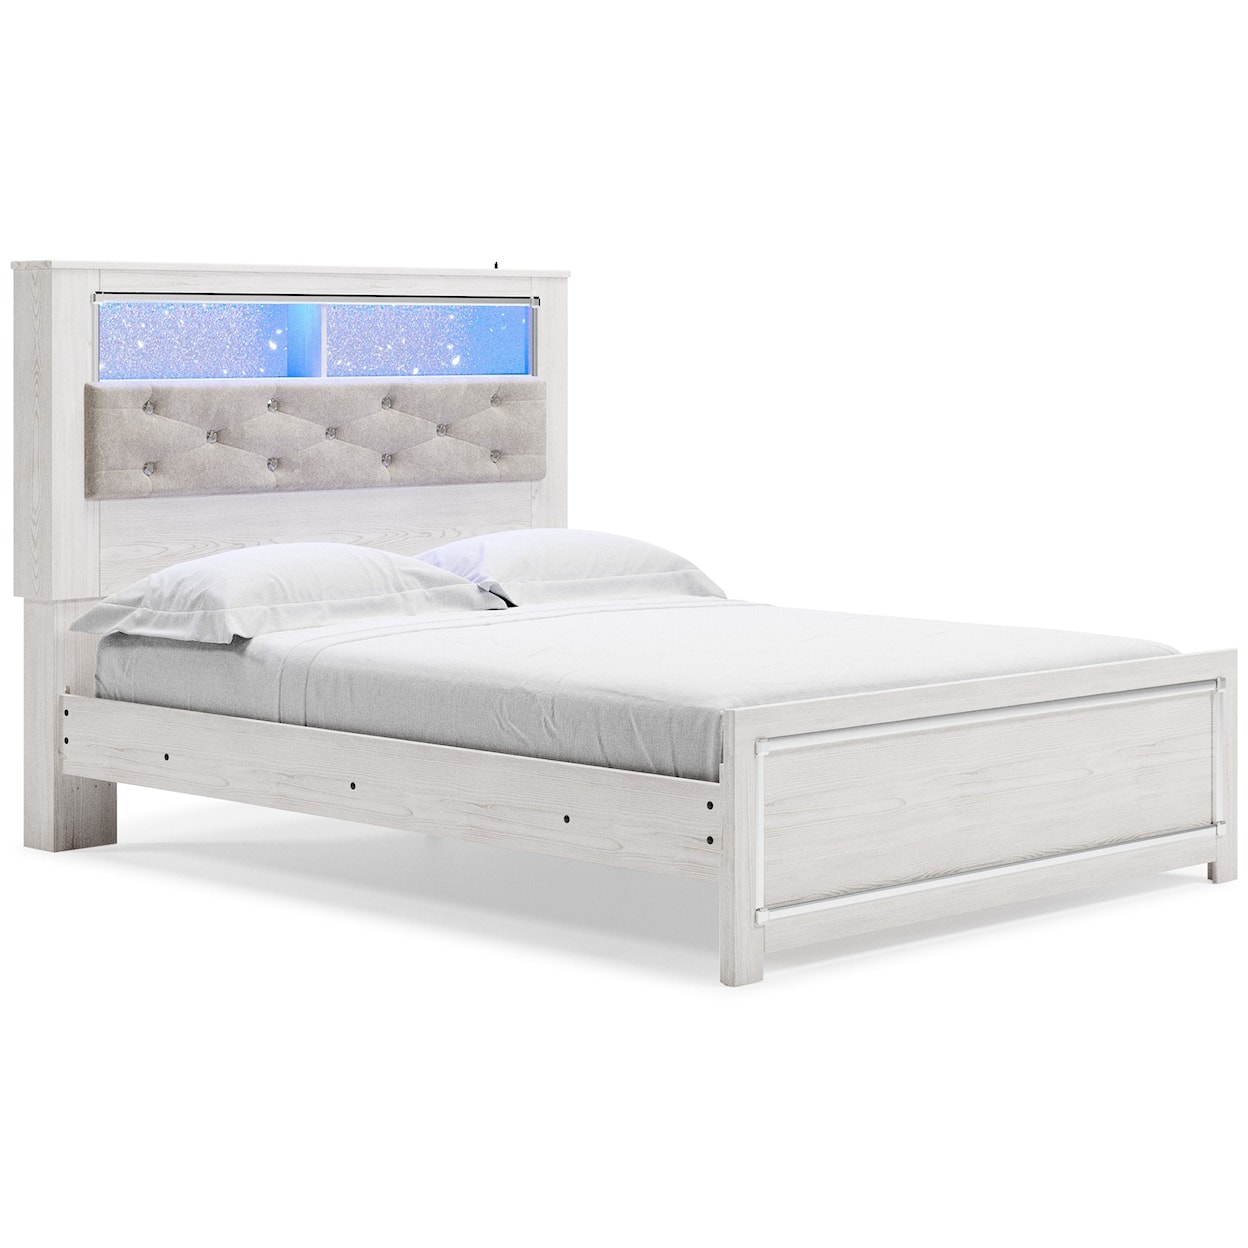 Signature Design Altyra Queen Upholstered Bookcase Bed